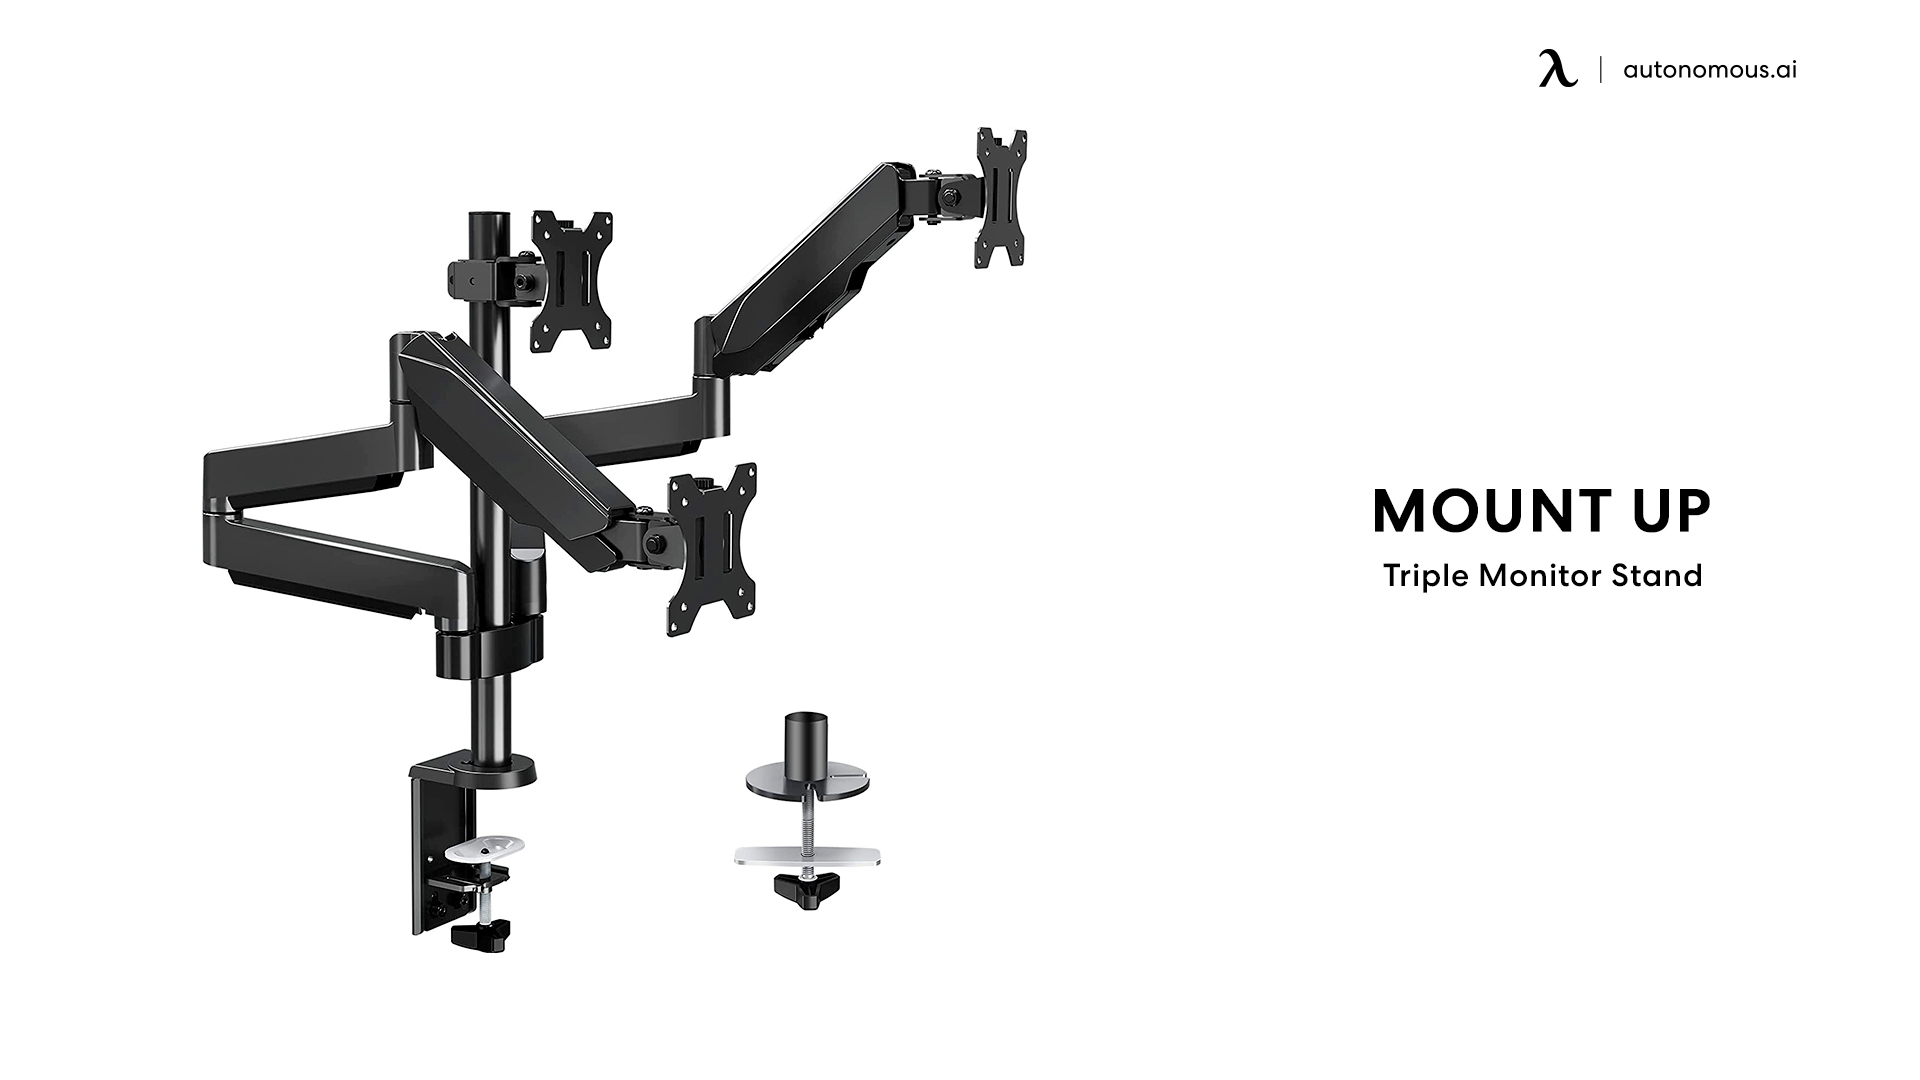 Mount up Triple Monitor Stand